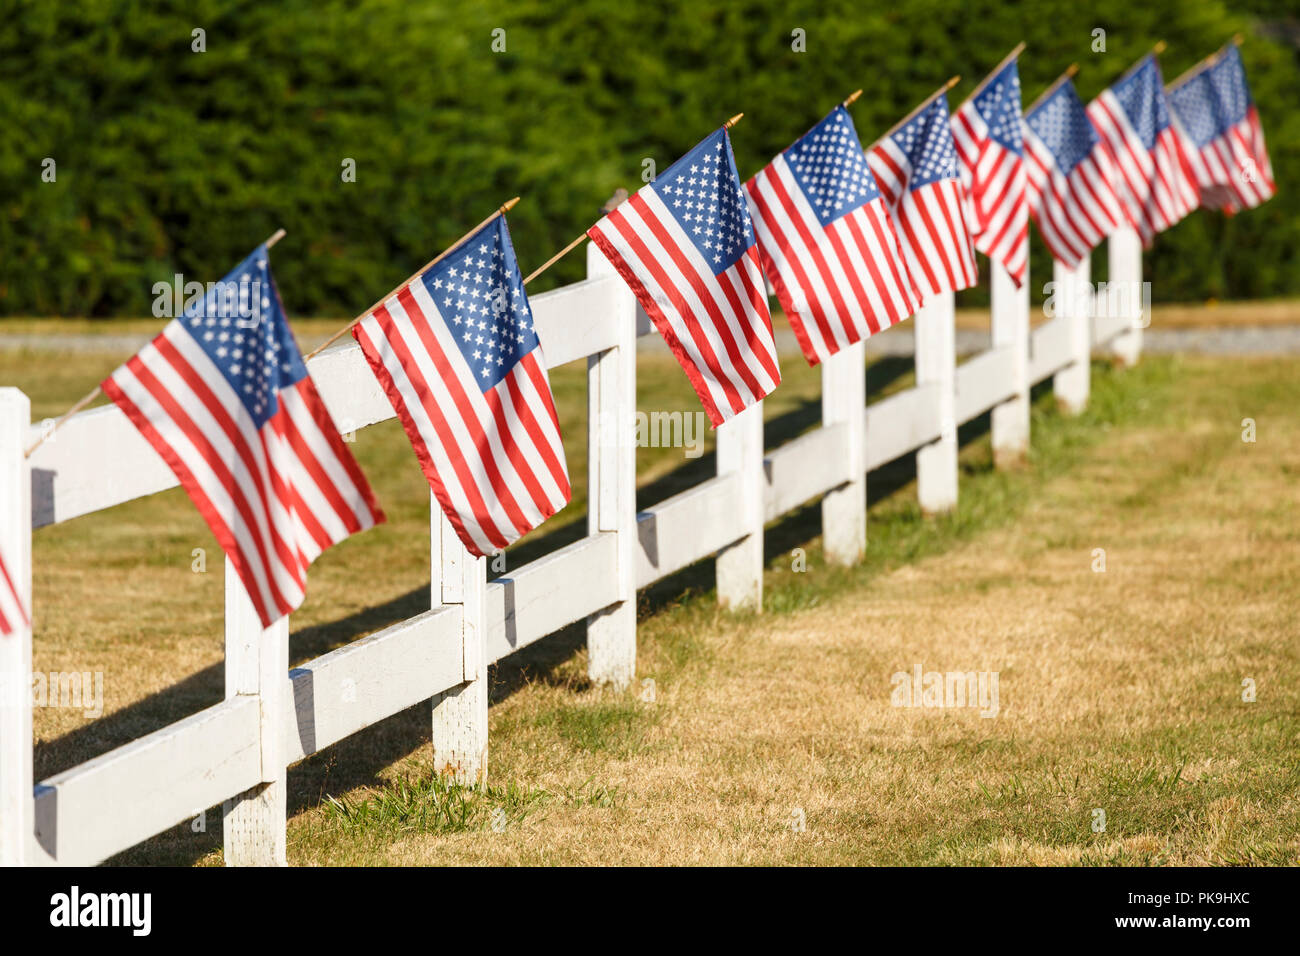 Patriotic display of American flags waving on white picket fence. Typical small town Americana Fourth of July Independence Day decorations. Stock Photo